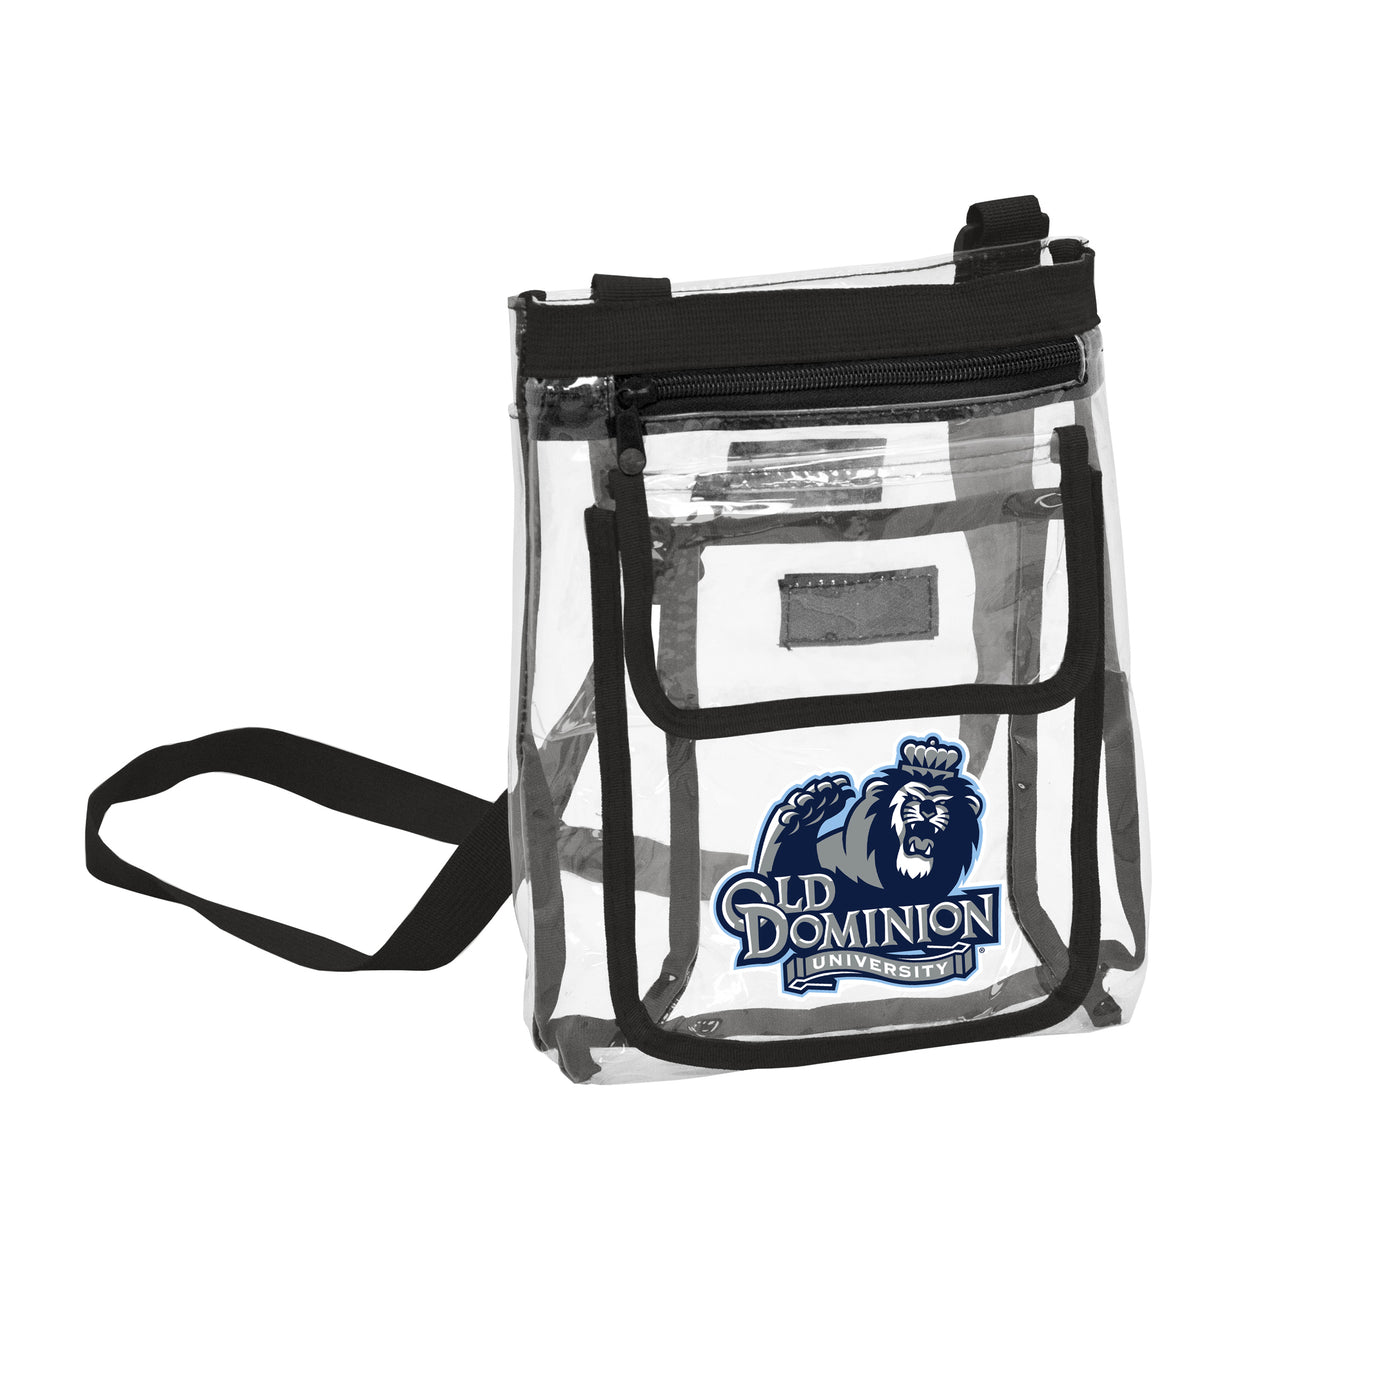 Old Dominion Gameday Clear Crossbody